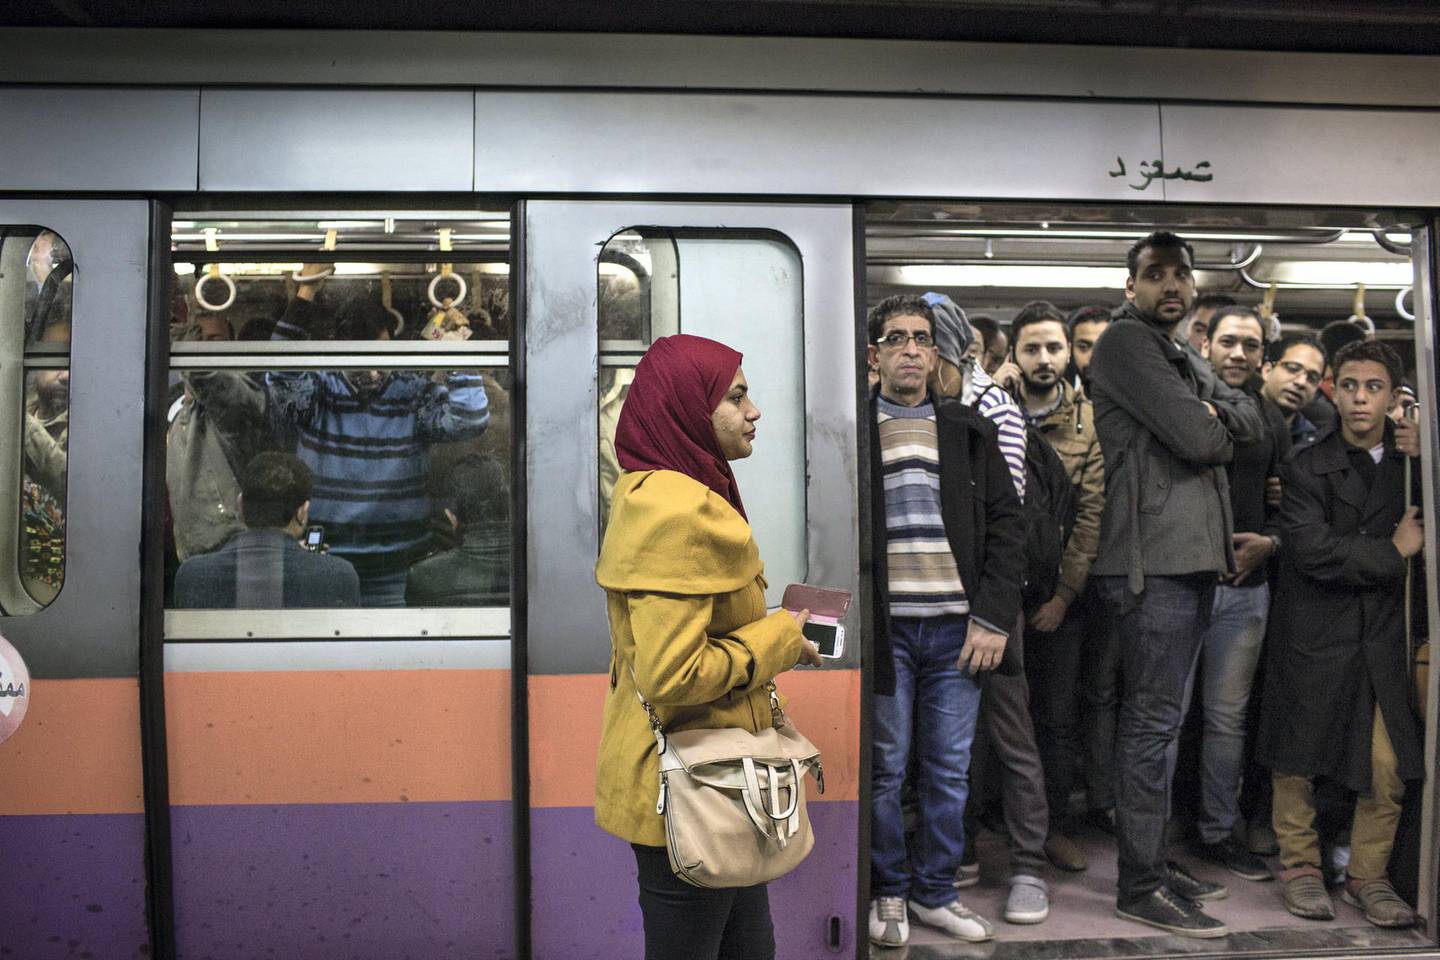 Ramsis metro station crowded all day not only during rush hours , many incidents of sexual harassment were repotted there. Women usually prefer to use the ladies metro cars for fear of being harassed in the crowded cars of men.